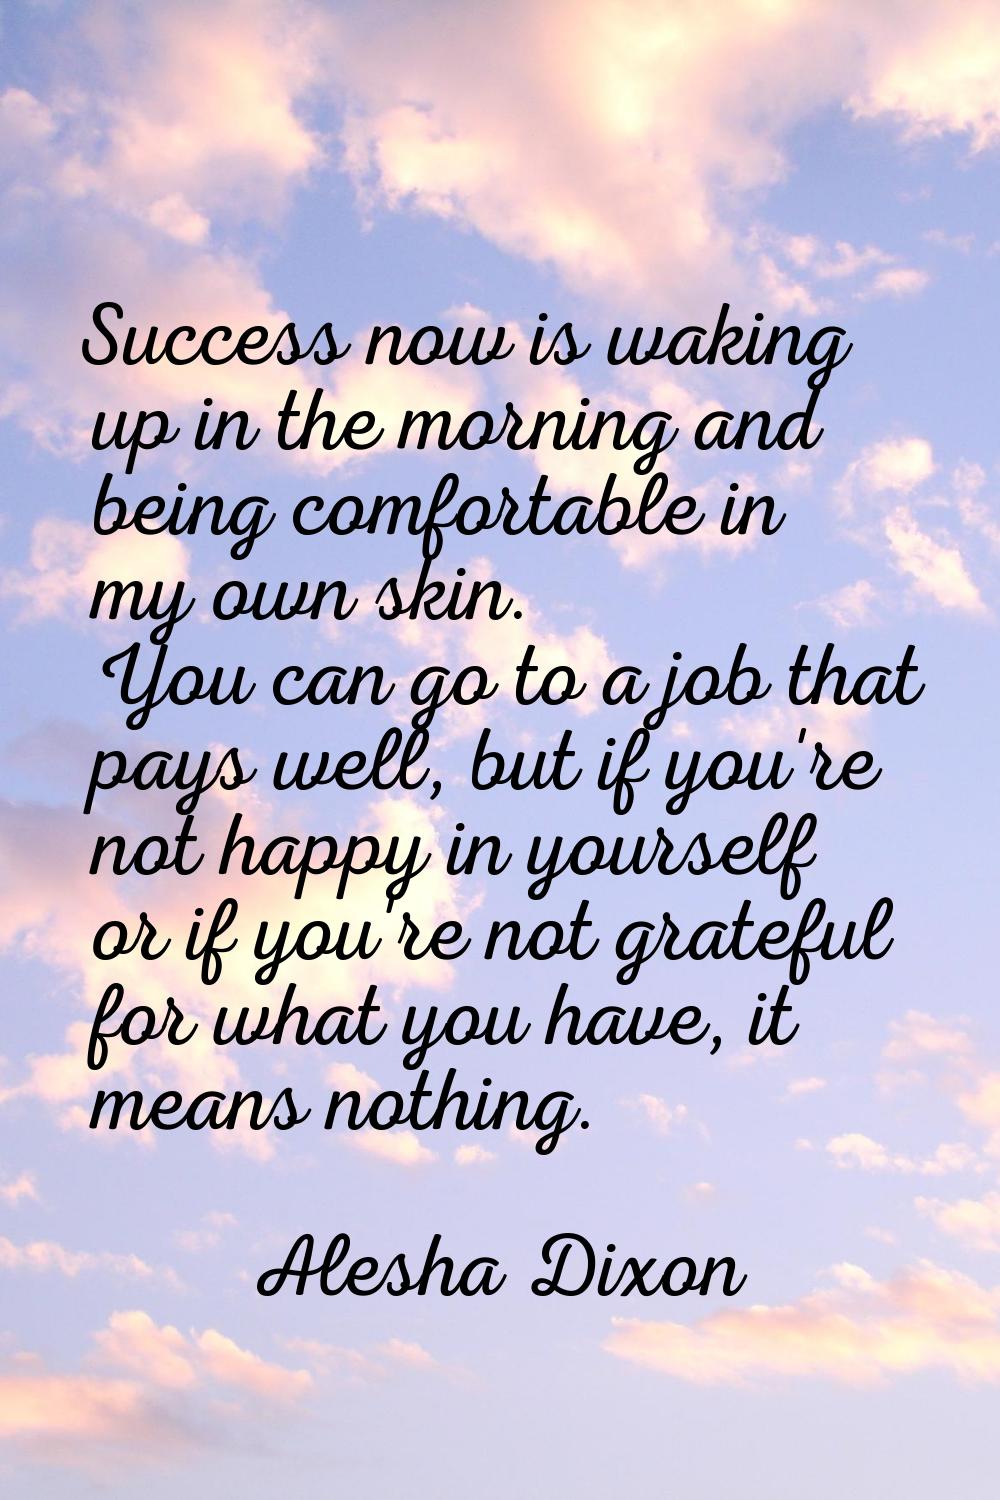 Success now is waking up in the morning and being comfortable in my own skin. You can go to a job t